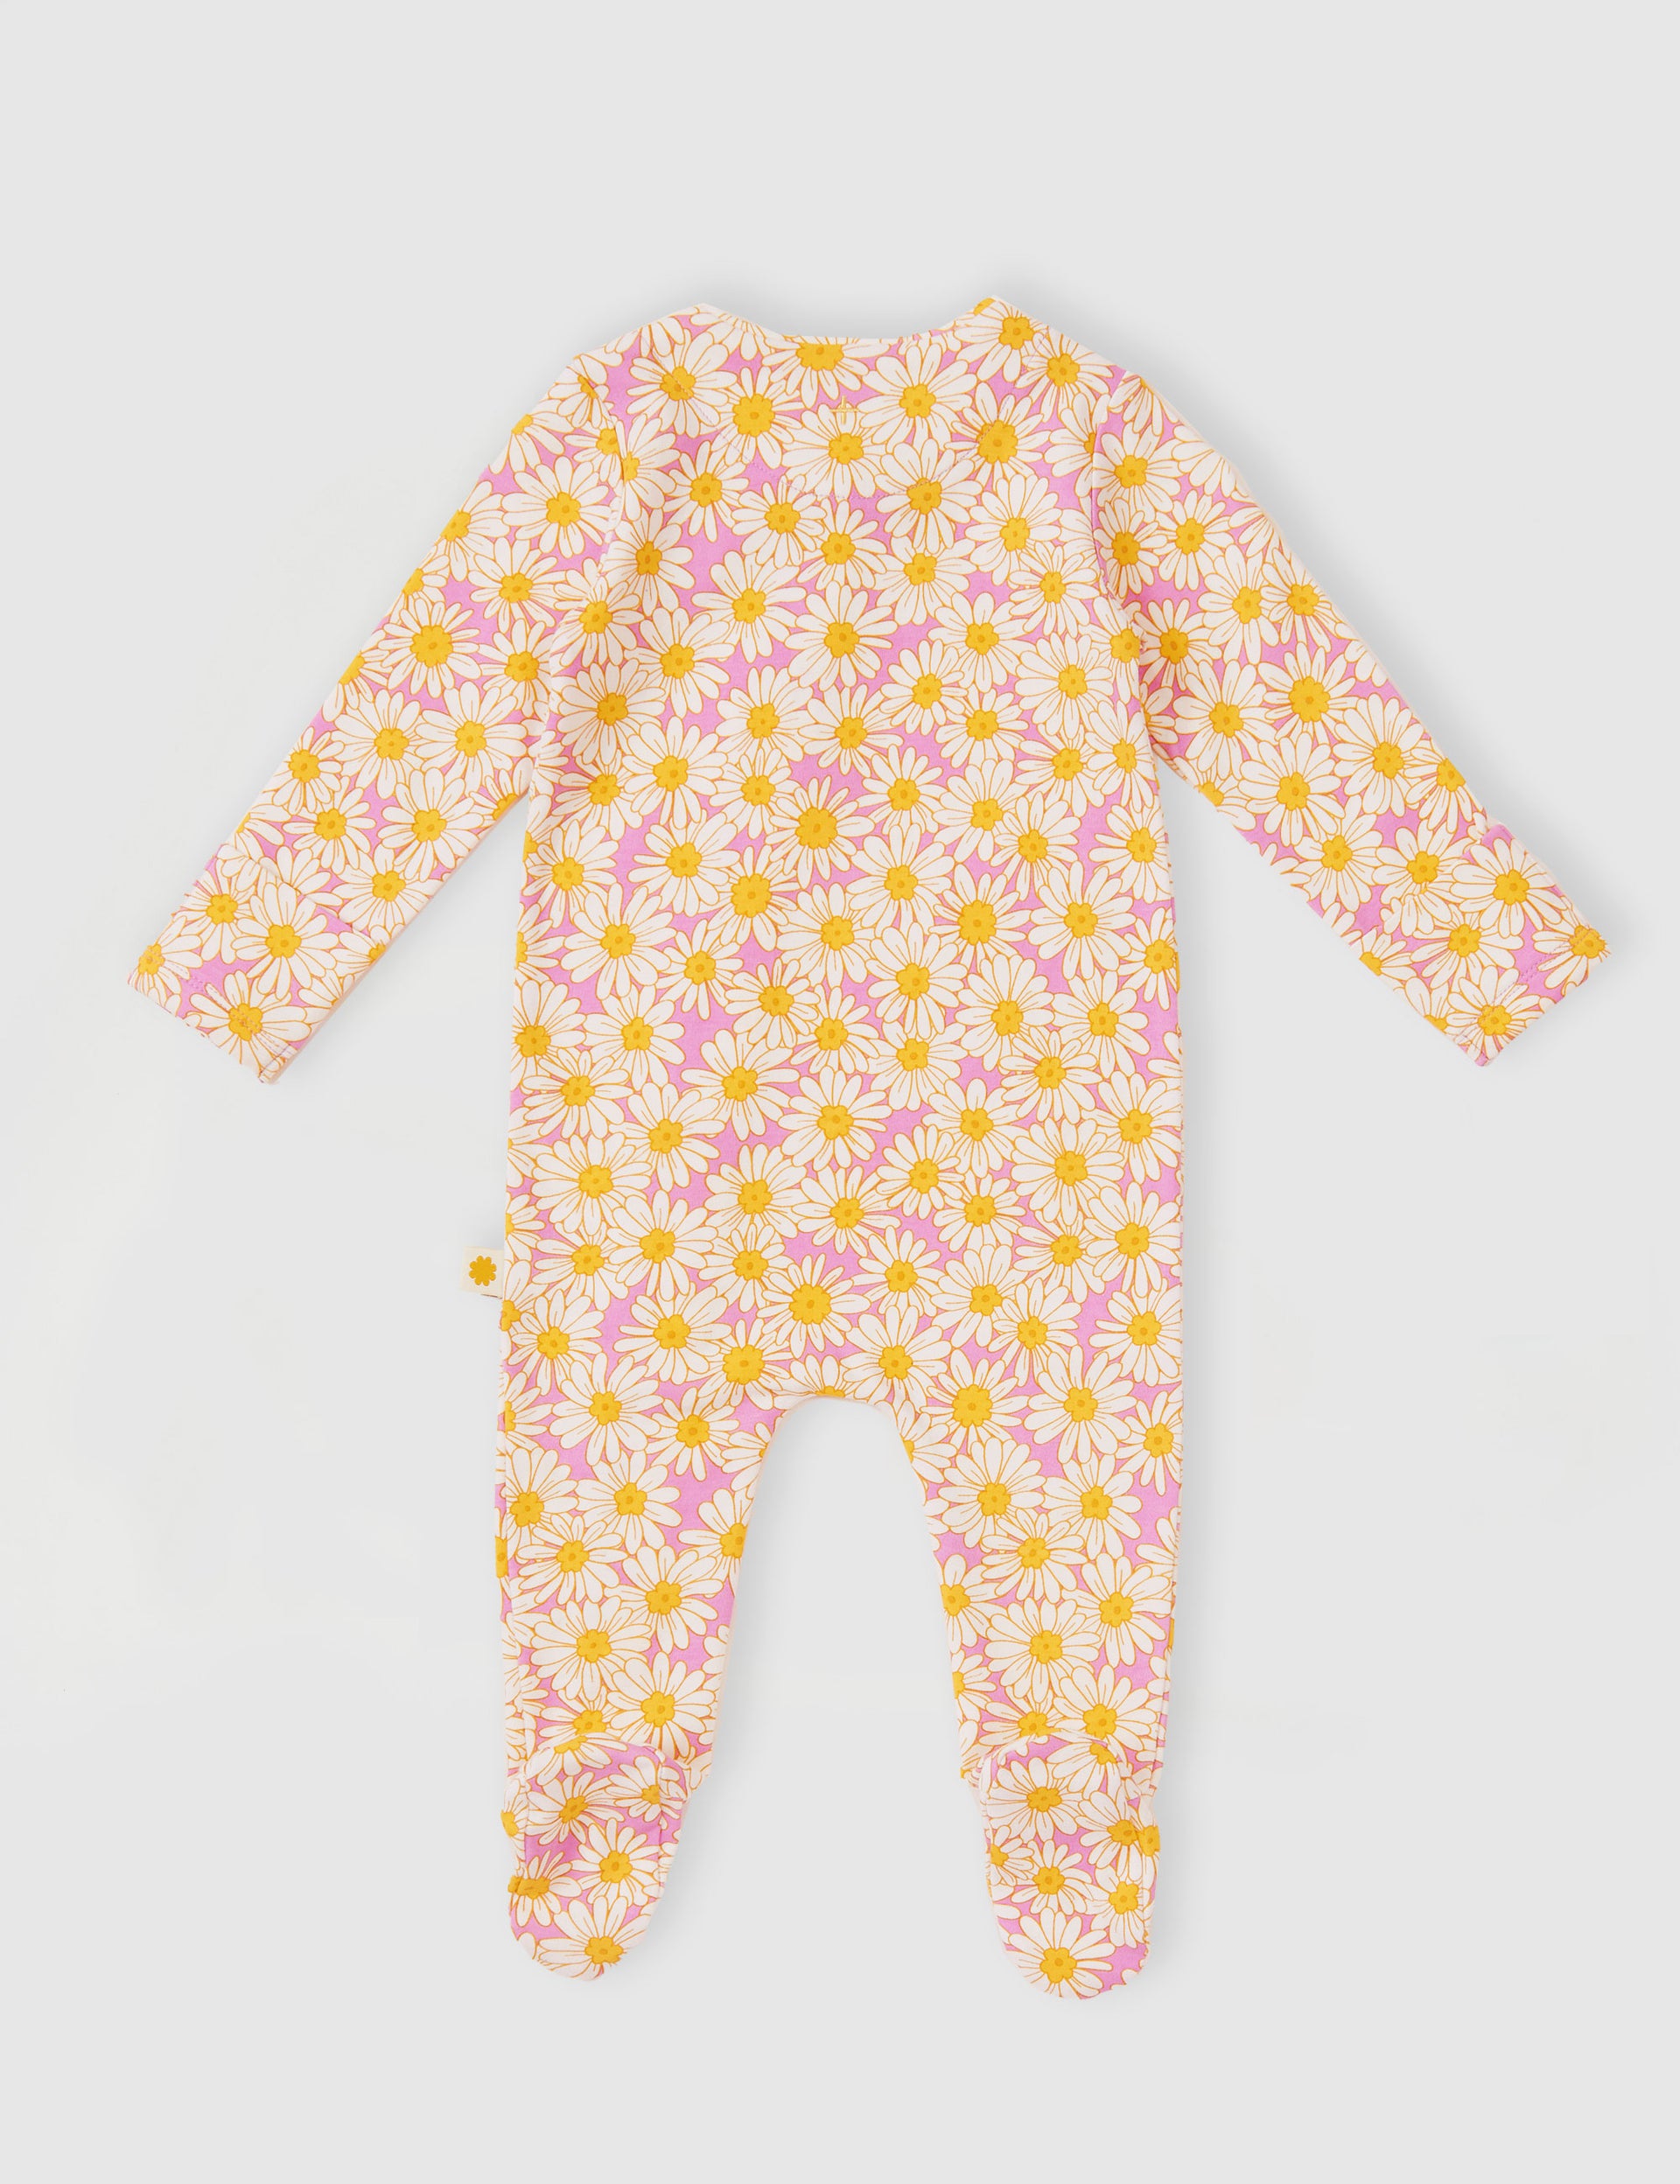 Daisy Meadow Footed Zipsuit